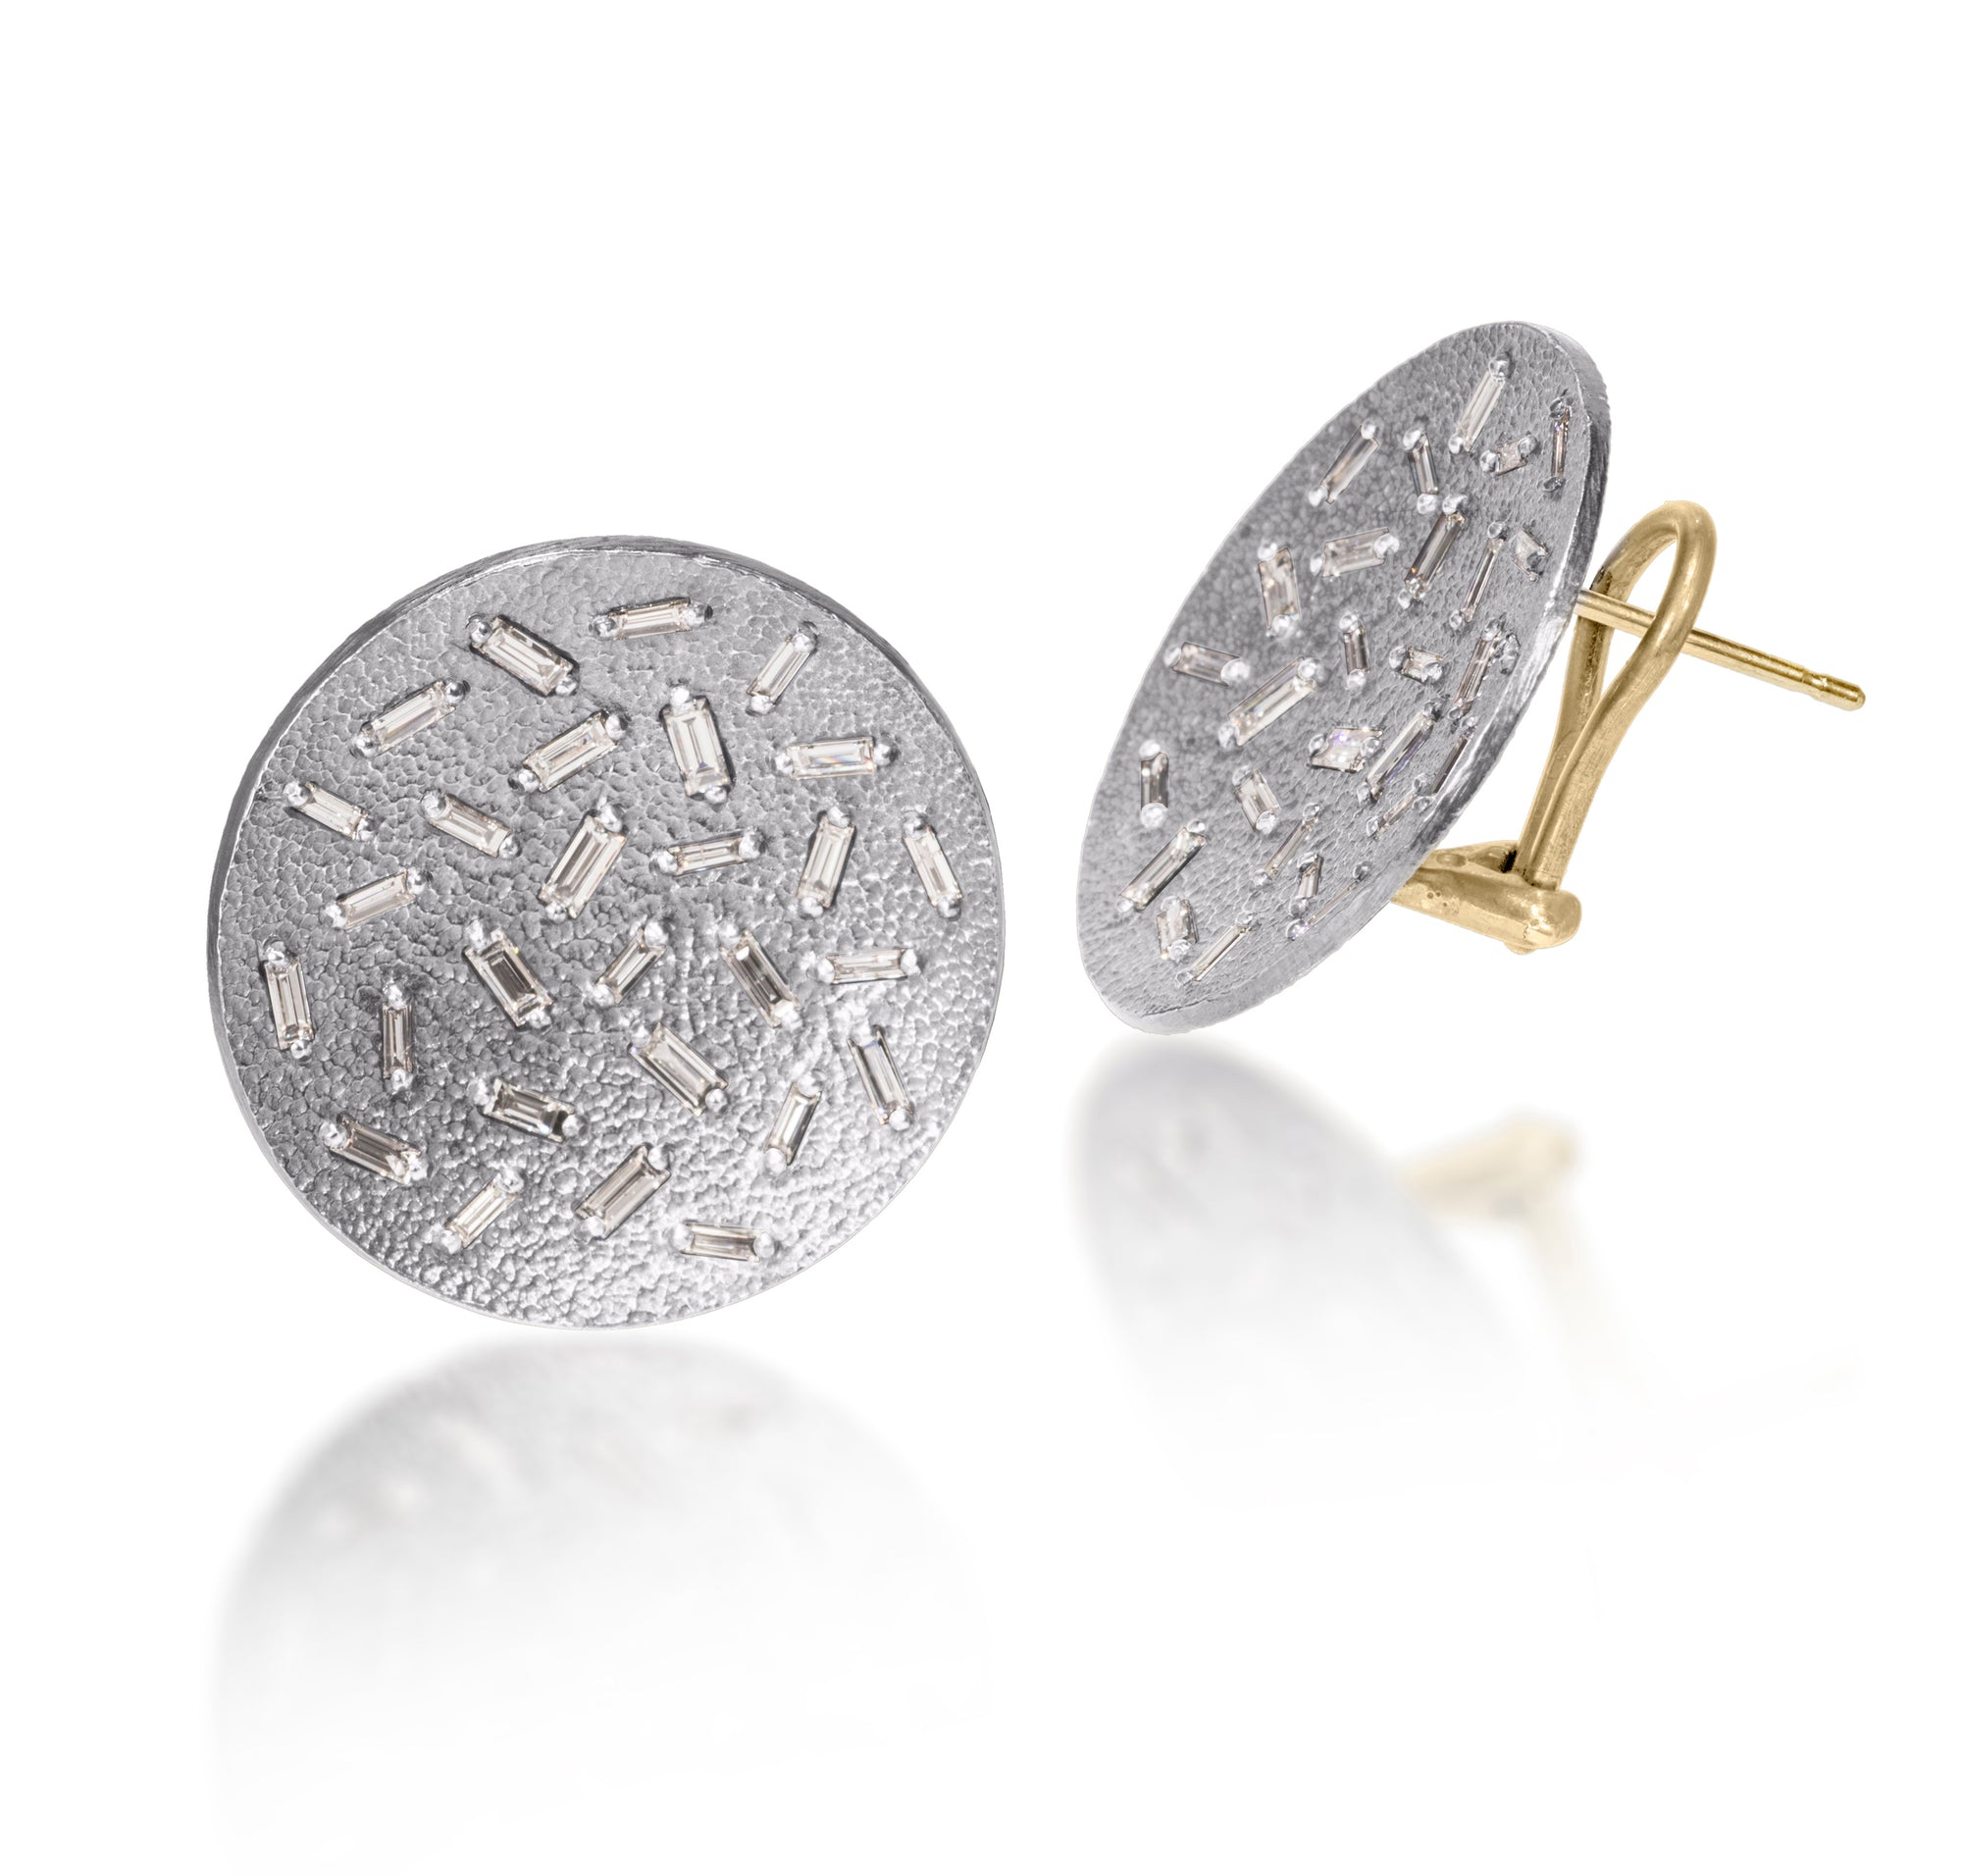 This simple but dramatic post earring is perfect for everyday or a fabulous night out.  Offered in three richly textured color ways, oxidized sterling, 18k gold, palladium.  Each earring set with 28 white diamond baguettes.  18k post features an omega back for added support. 1.546 tcw.